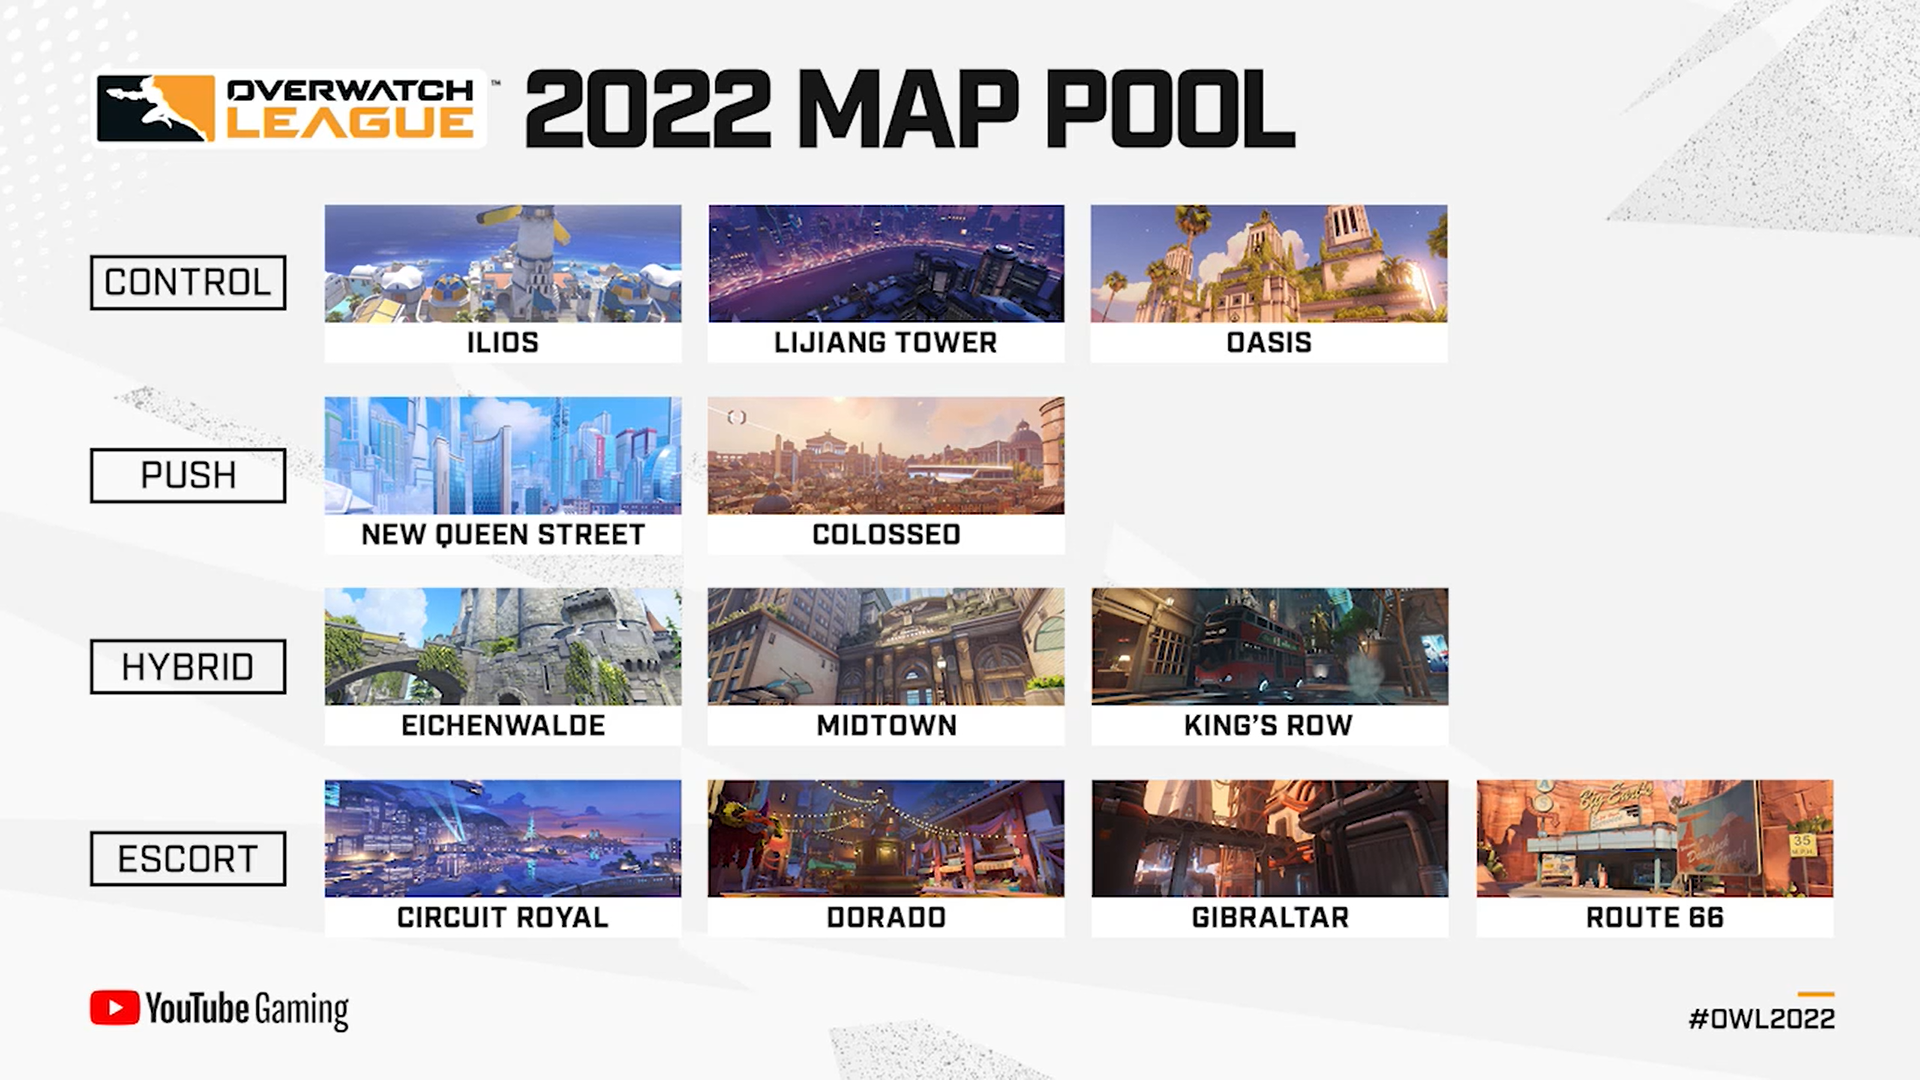 Community Update 2022 Schedule and Map Pool The Overwatch League